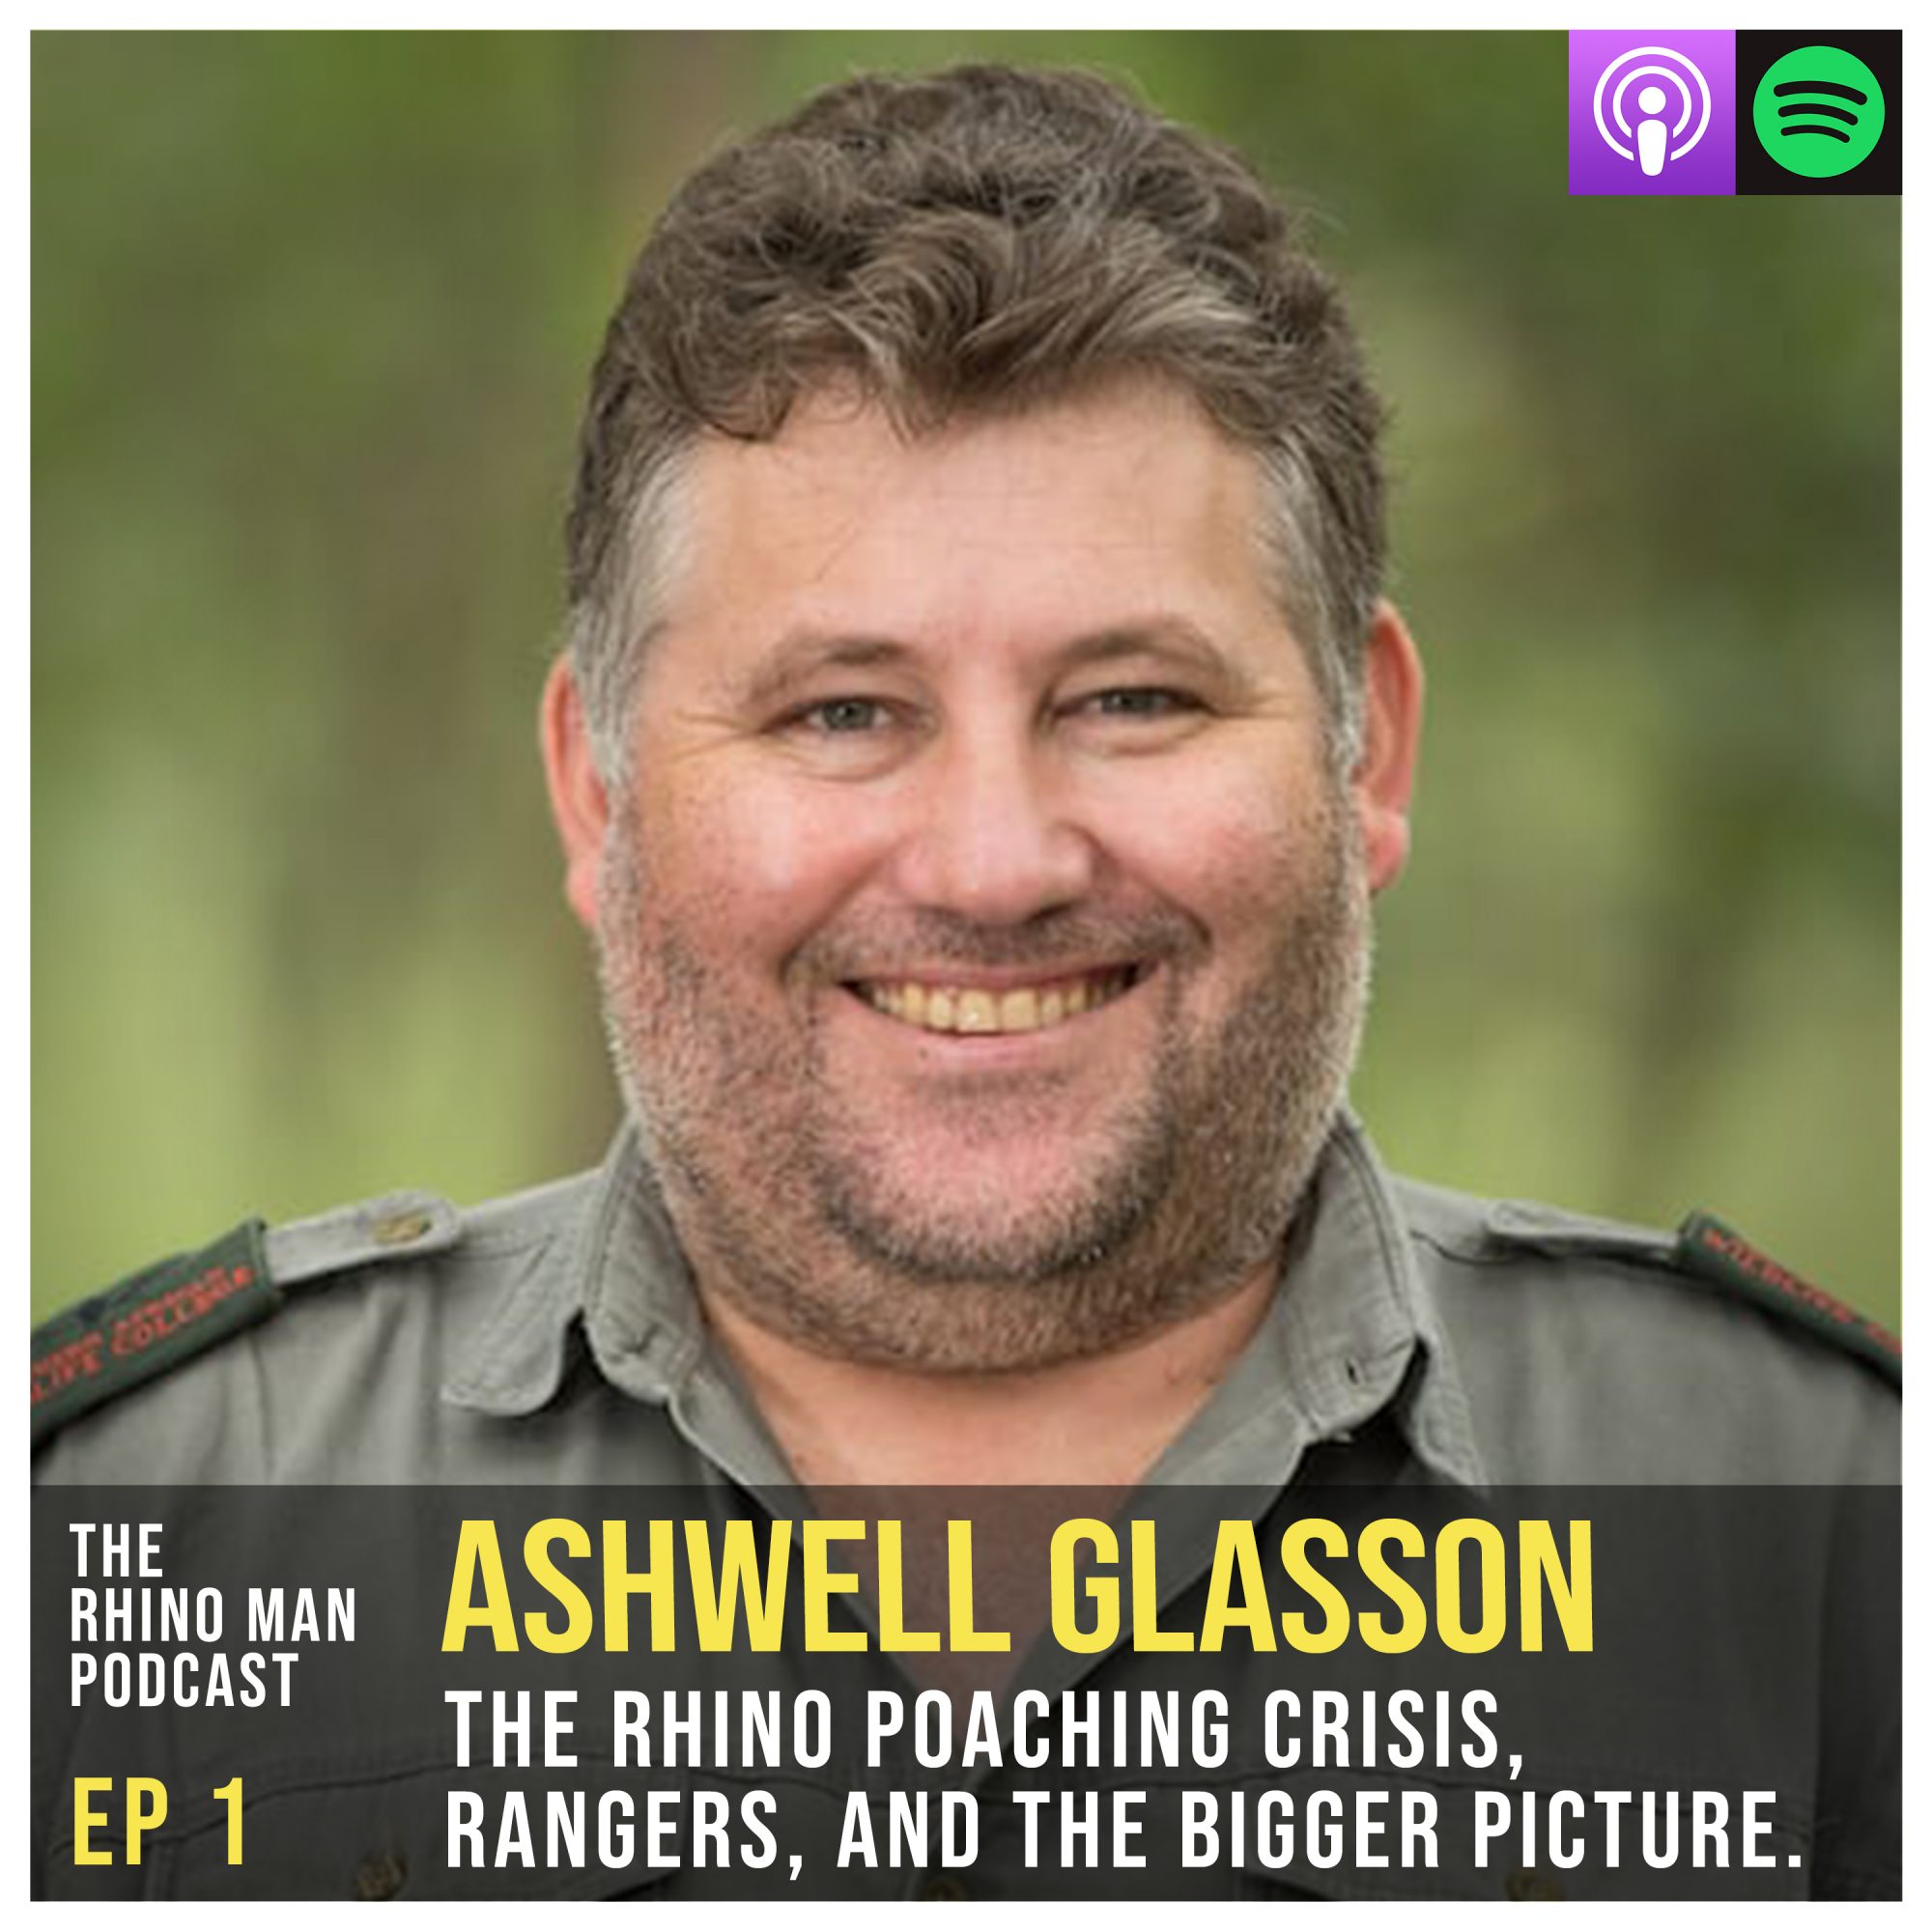 Ep 1: Ashwell Glasson – The rhino poaching crisis, rangers, and the bigger picture.